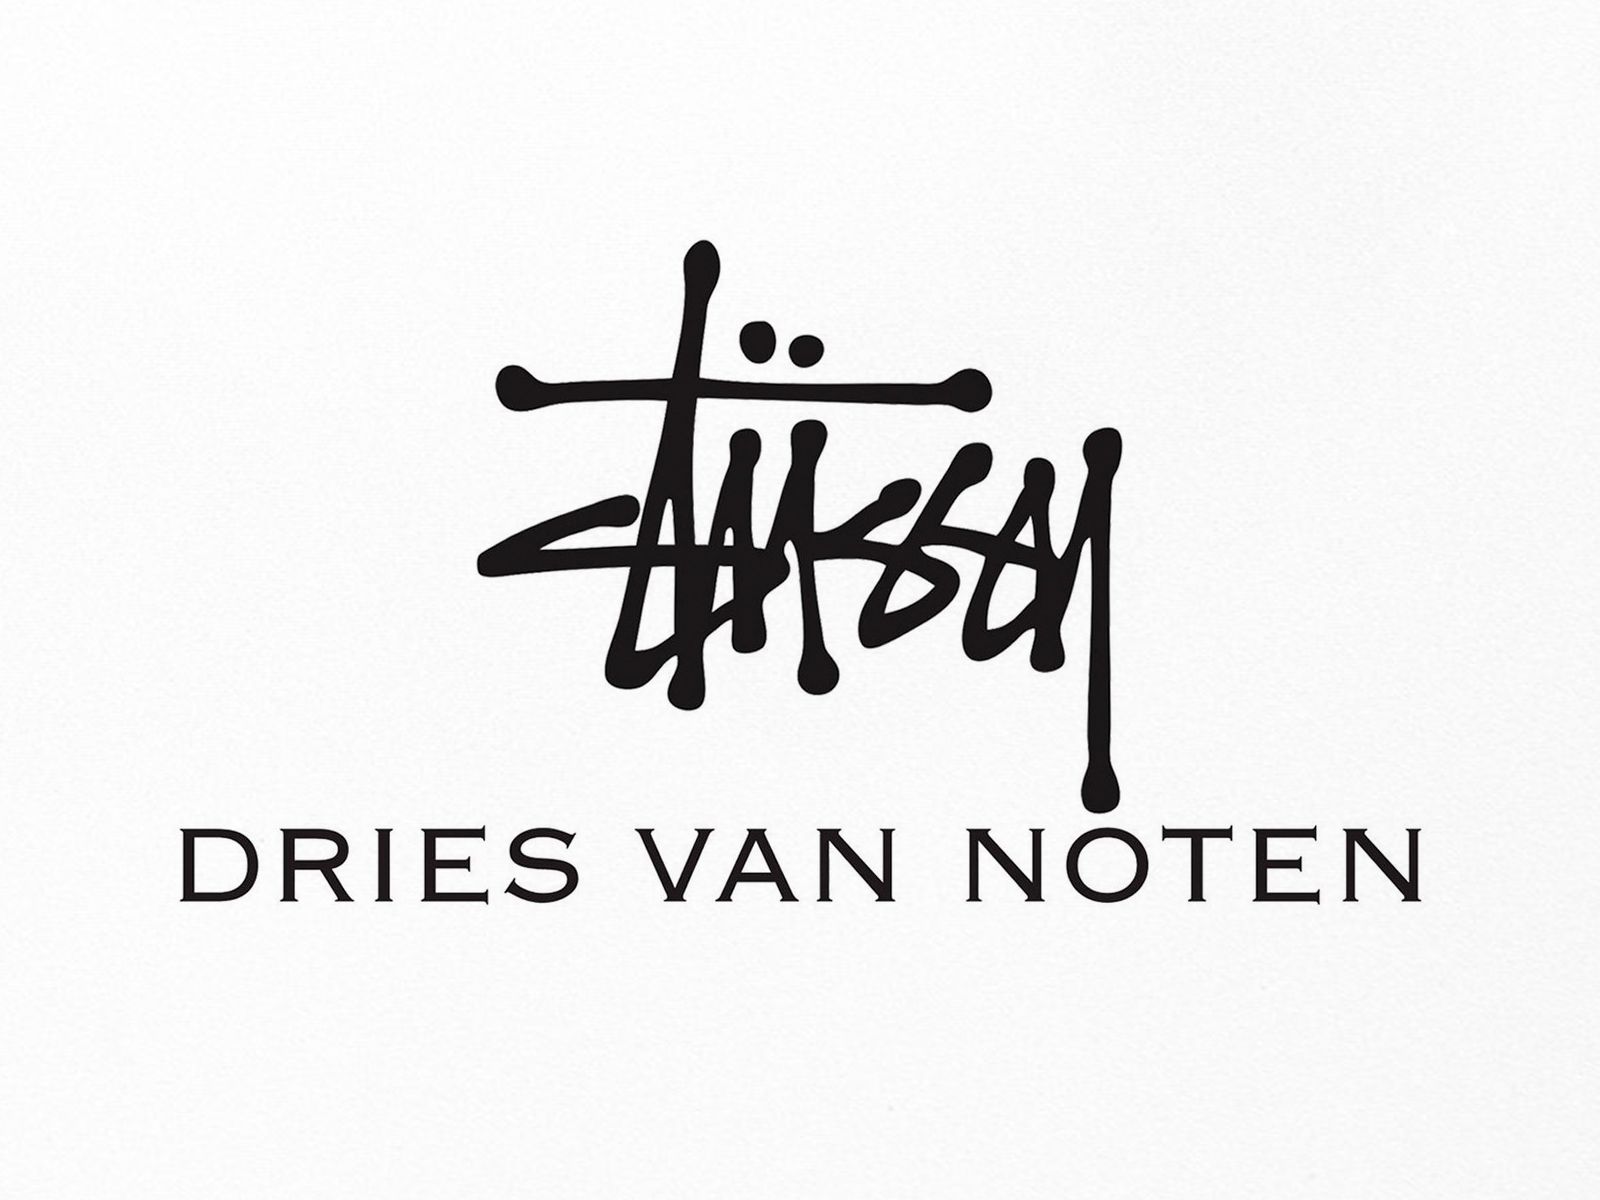 First details on the collaboration between Stüssy and Dries Van Noten